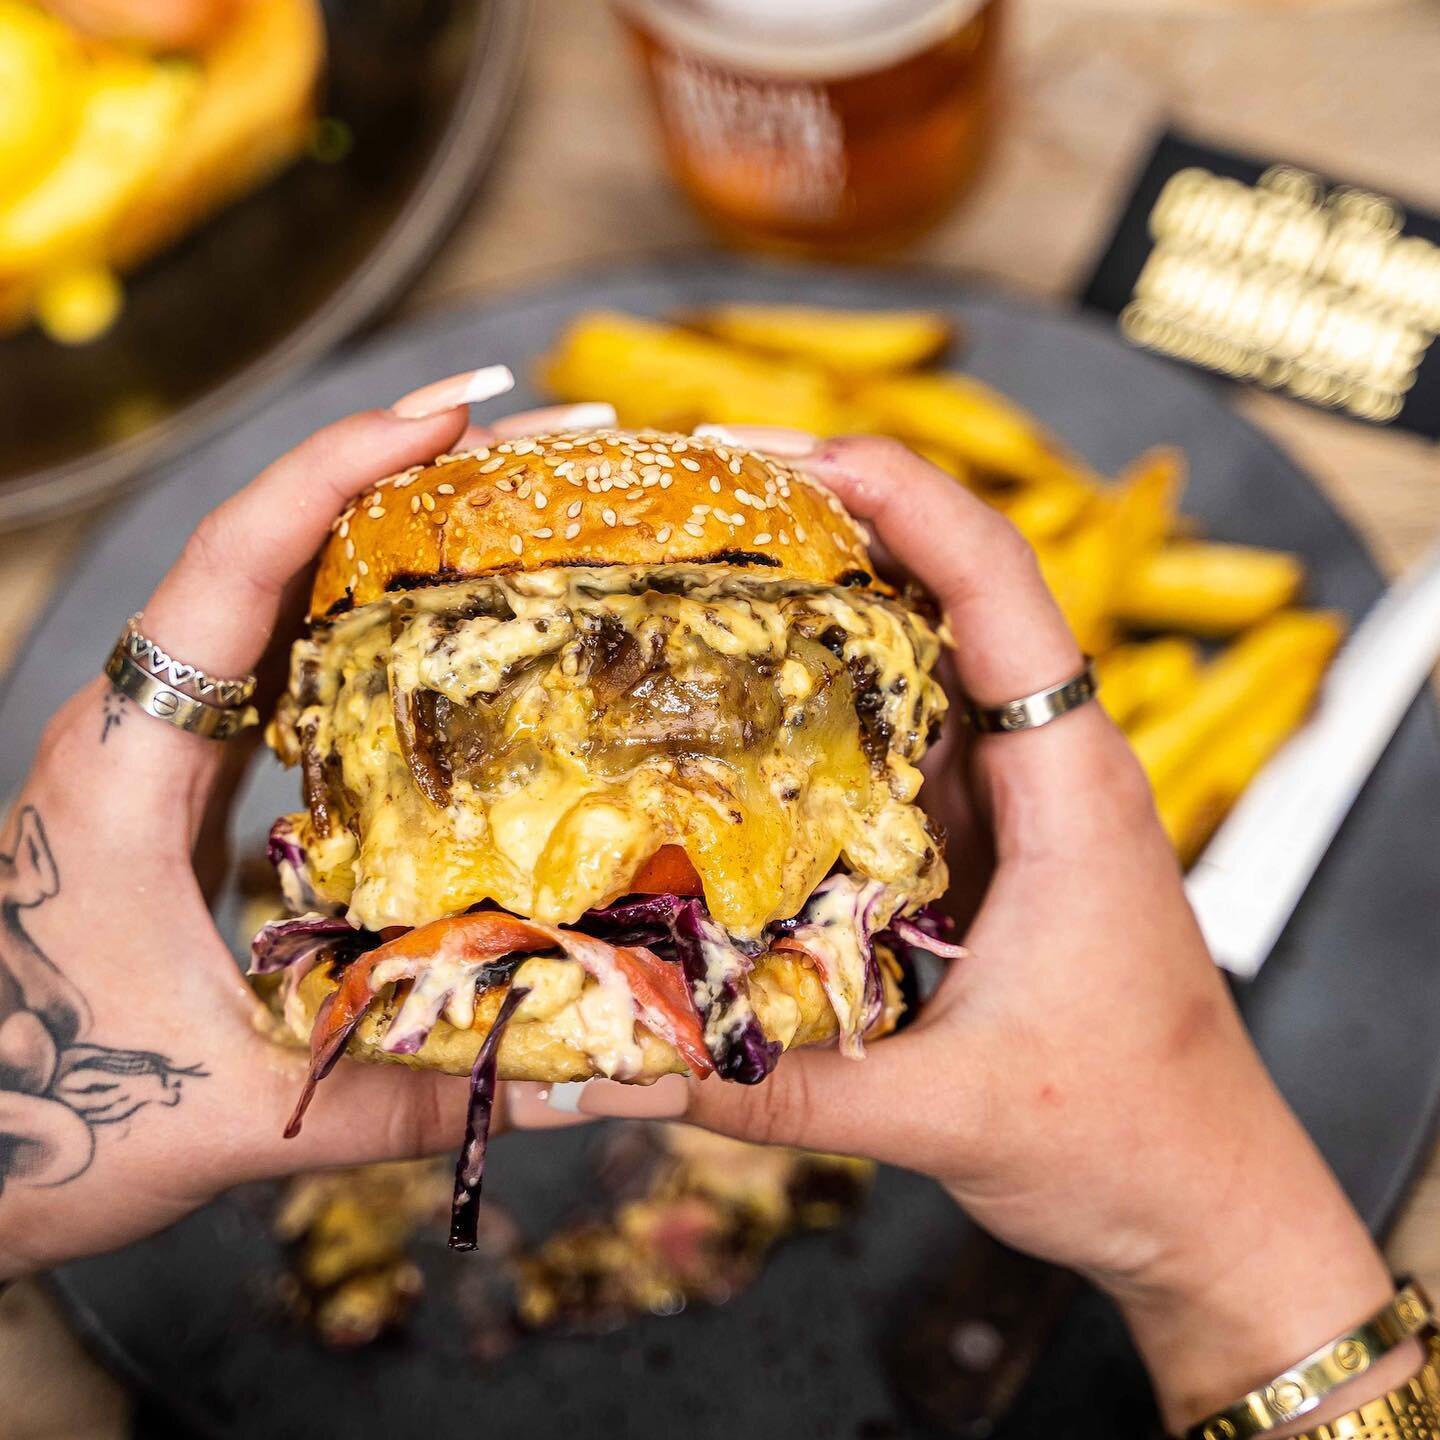 🔥Weekend o&rsquo;clock 🍔 🍺 Live music from 630pm 🎷 #greenparkbrasserie #burger #foodporn #burgerporn #chef #cheflife #burgerlover #burgertime #foodie #foodphotography #foodpics